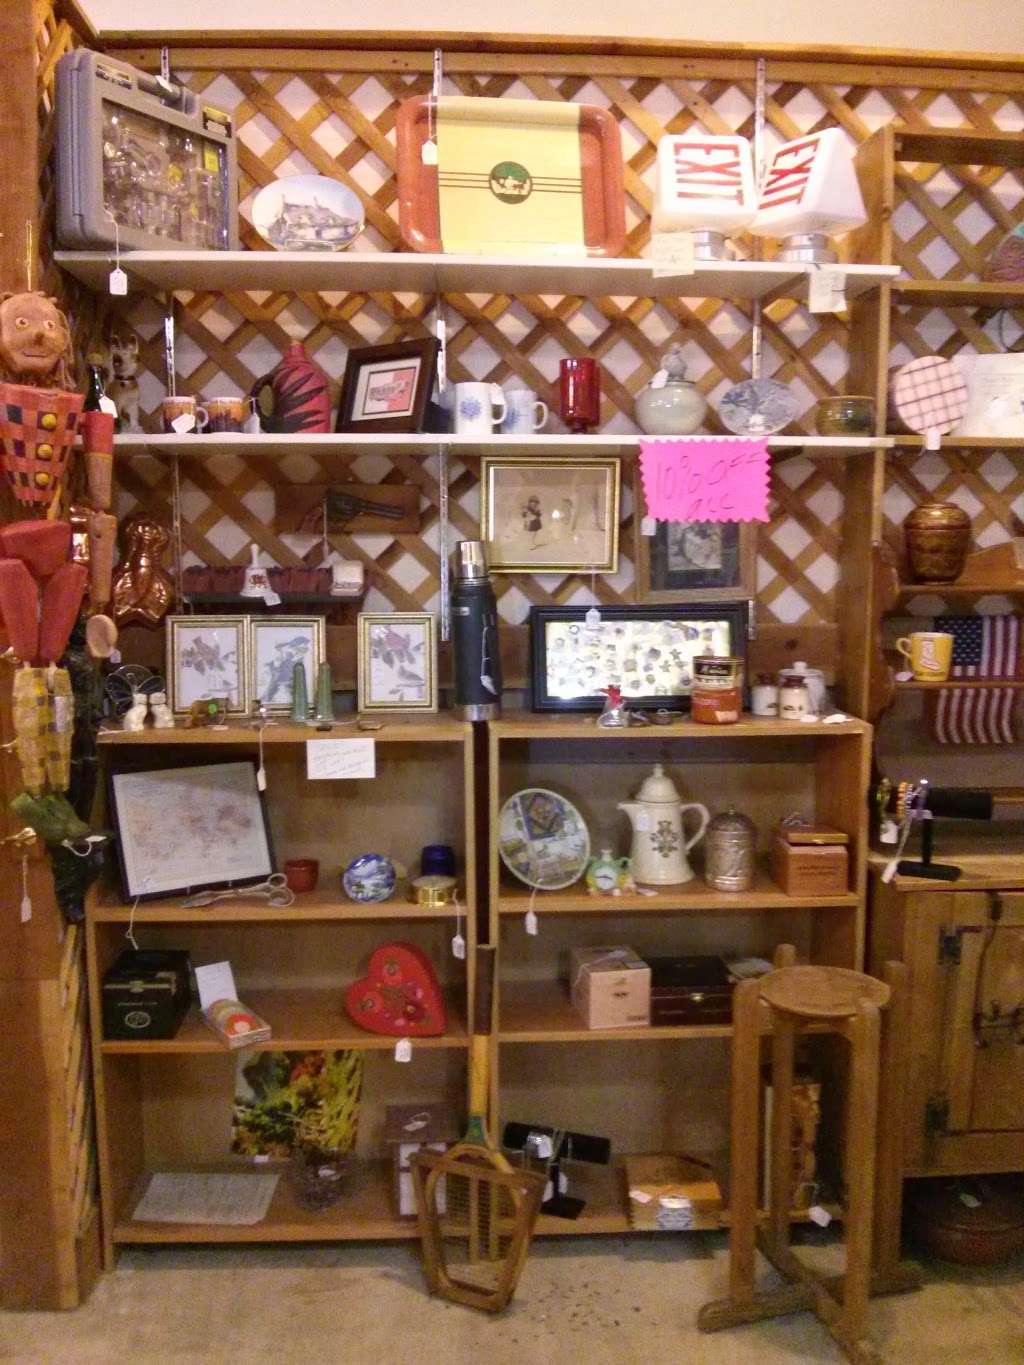 Crafters Village and Wind Toys | 8300 Pearblossom Hwy, Littlerock, CA 93543 | Phone: (661) 361-2108